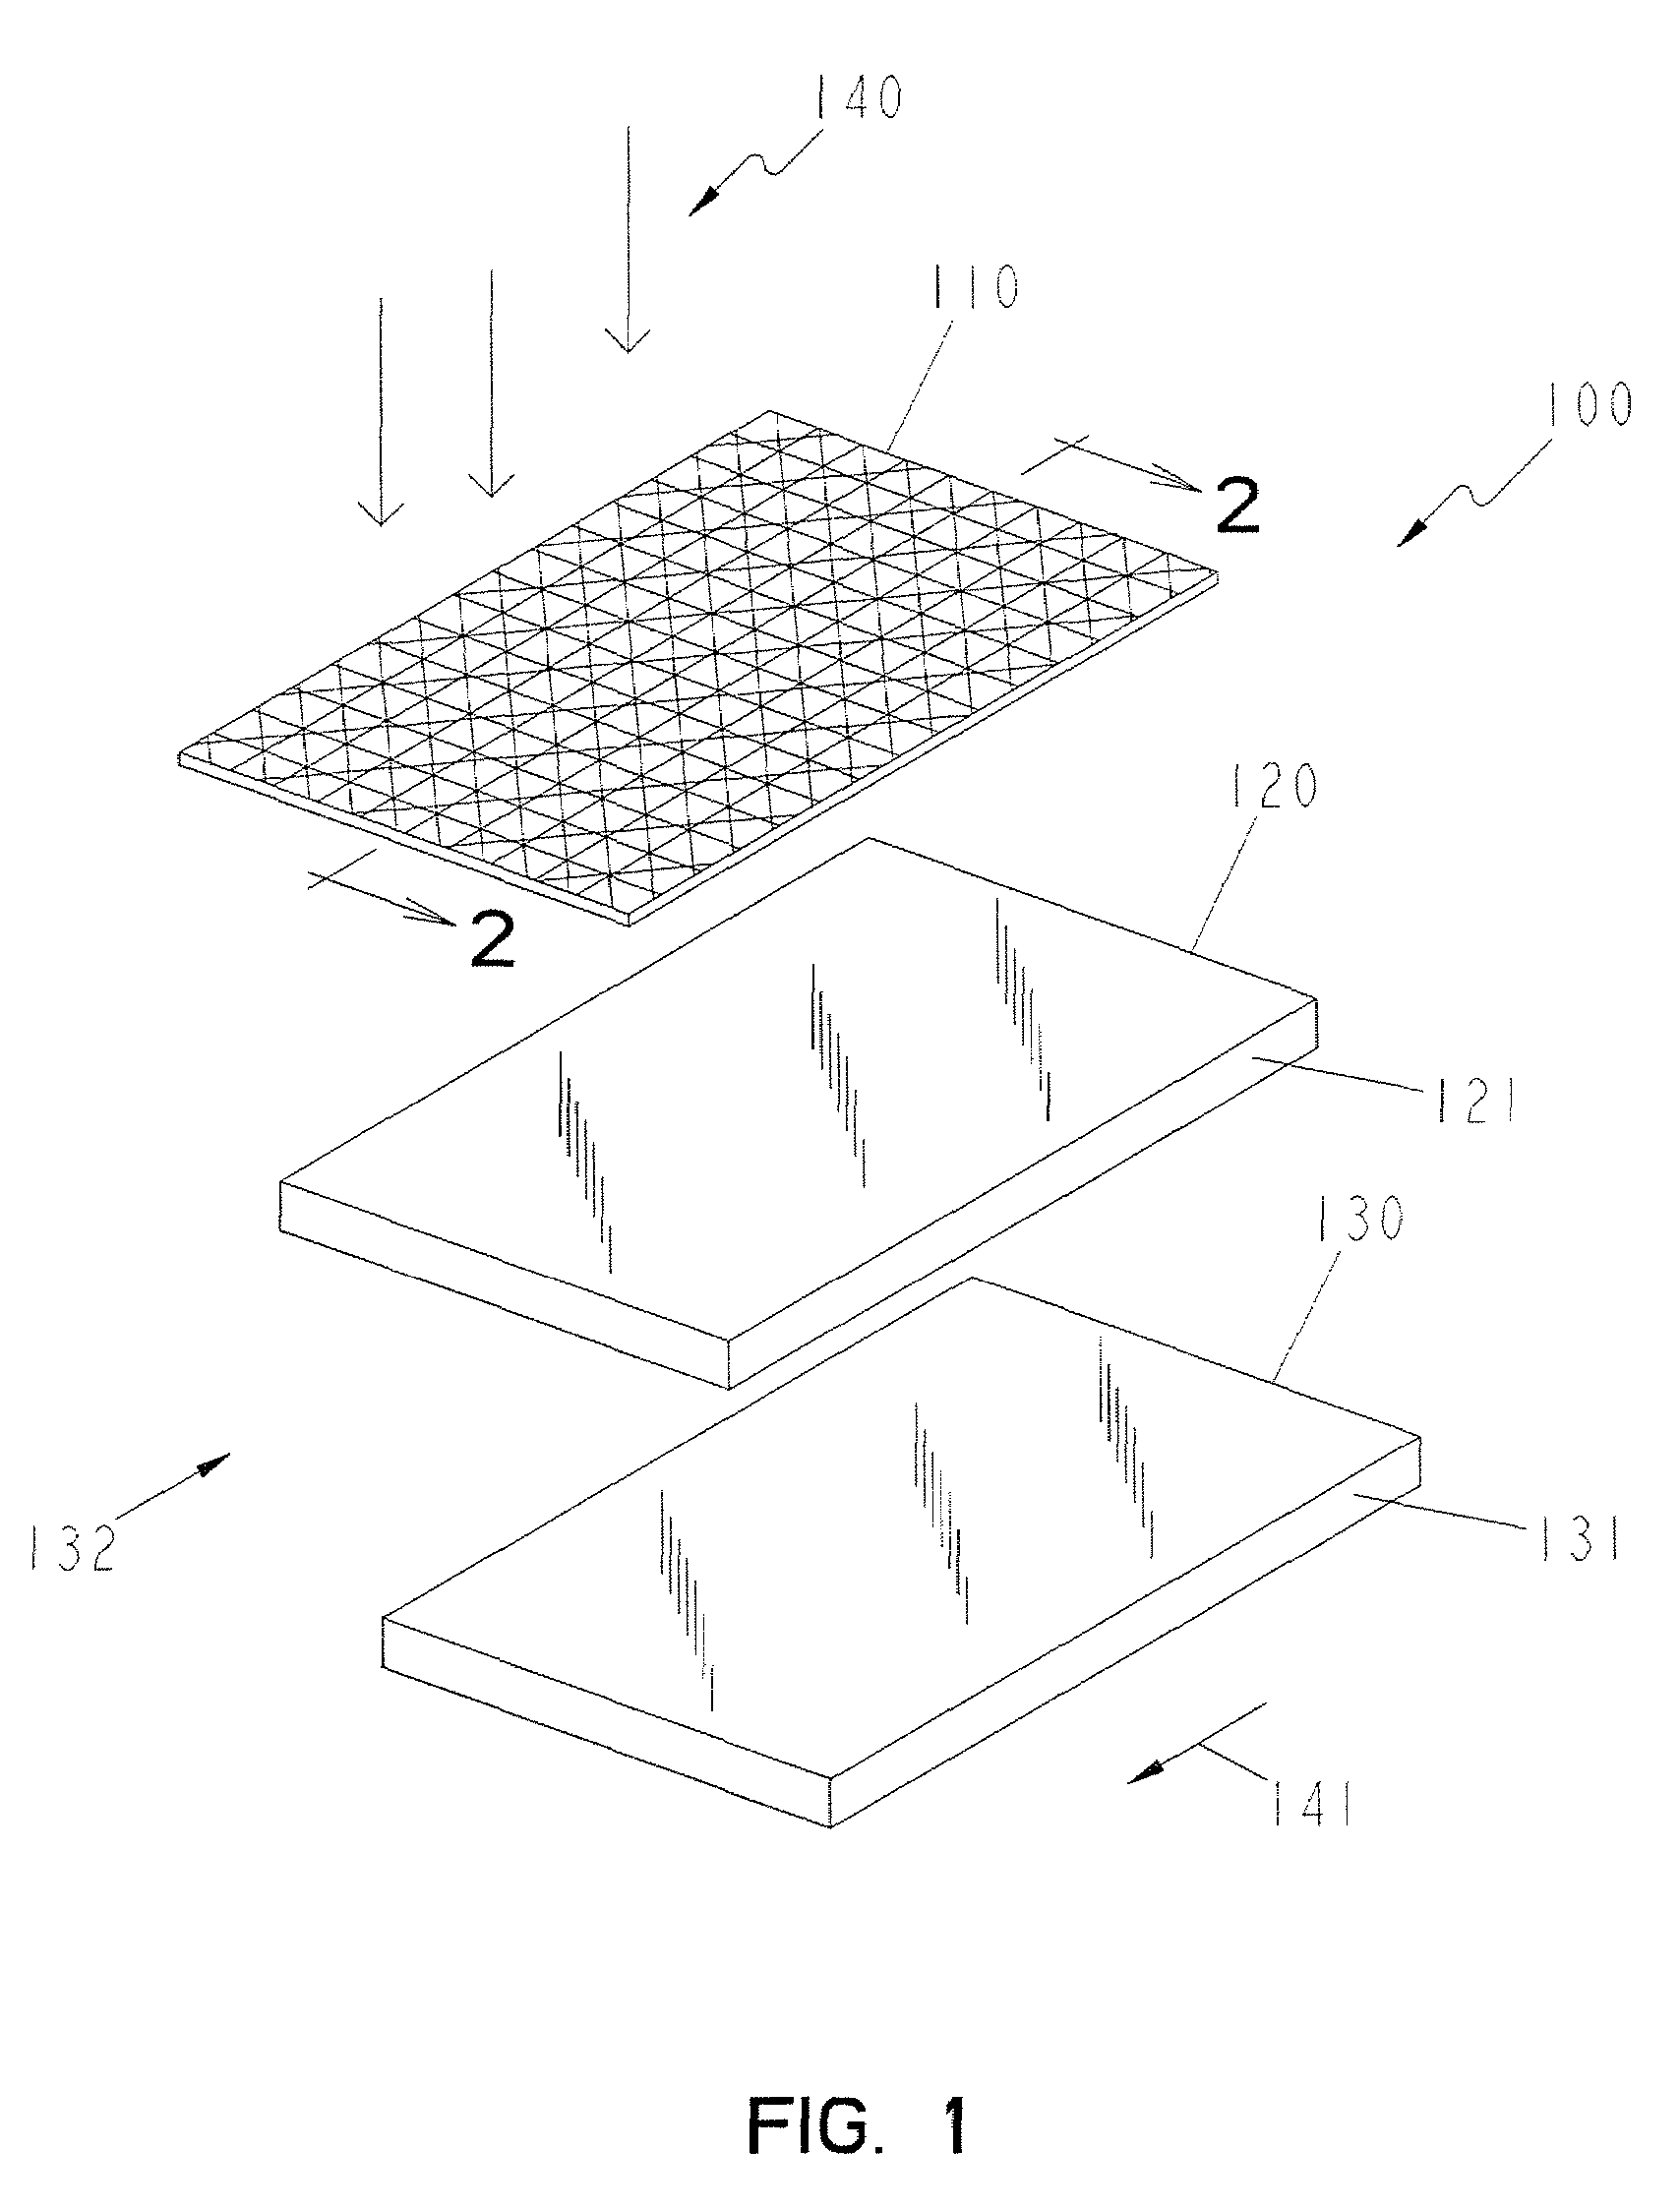 Apparatus for the collection and transmission of electromagnetic radiation